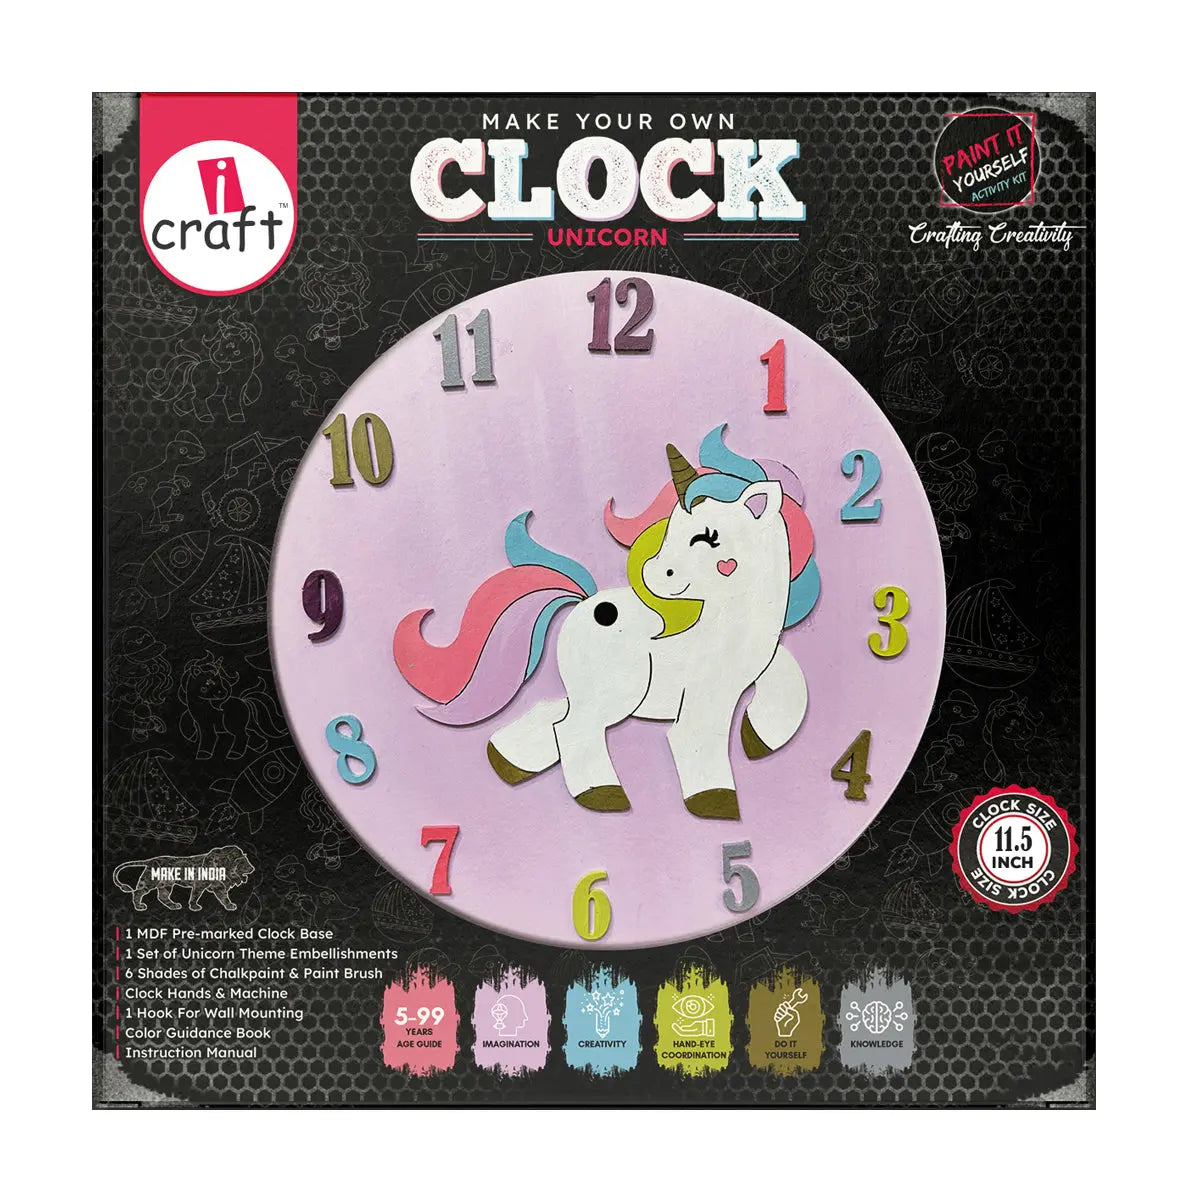 I Carft DIY Clock Kit With Round Wood, Acrylic Pouring Paint, Clock Mechanism iCraft